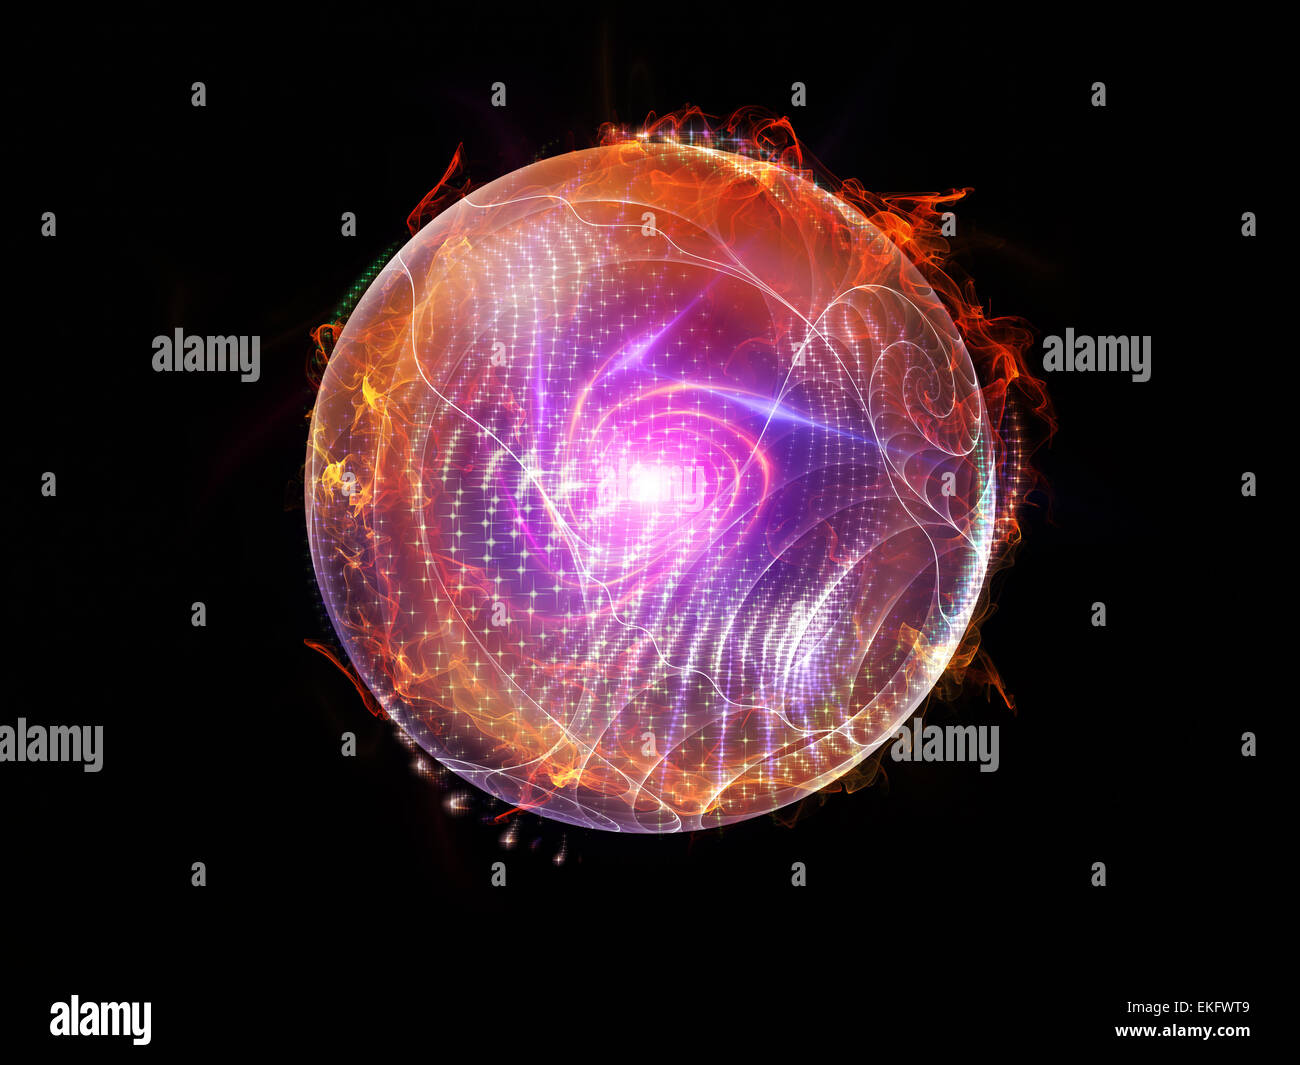 Visualization of Fractal Sphere Stock Photo